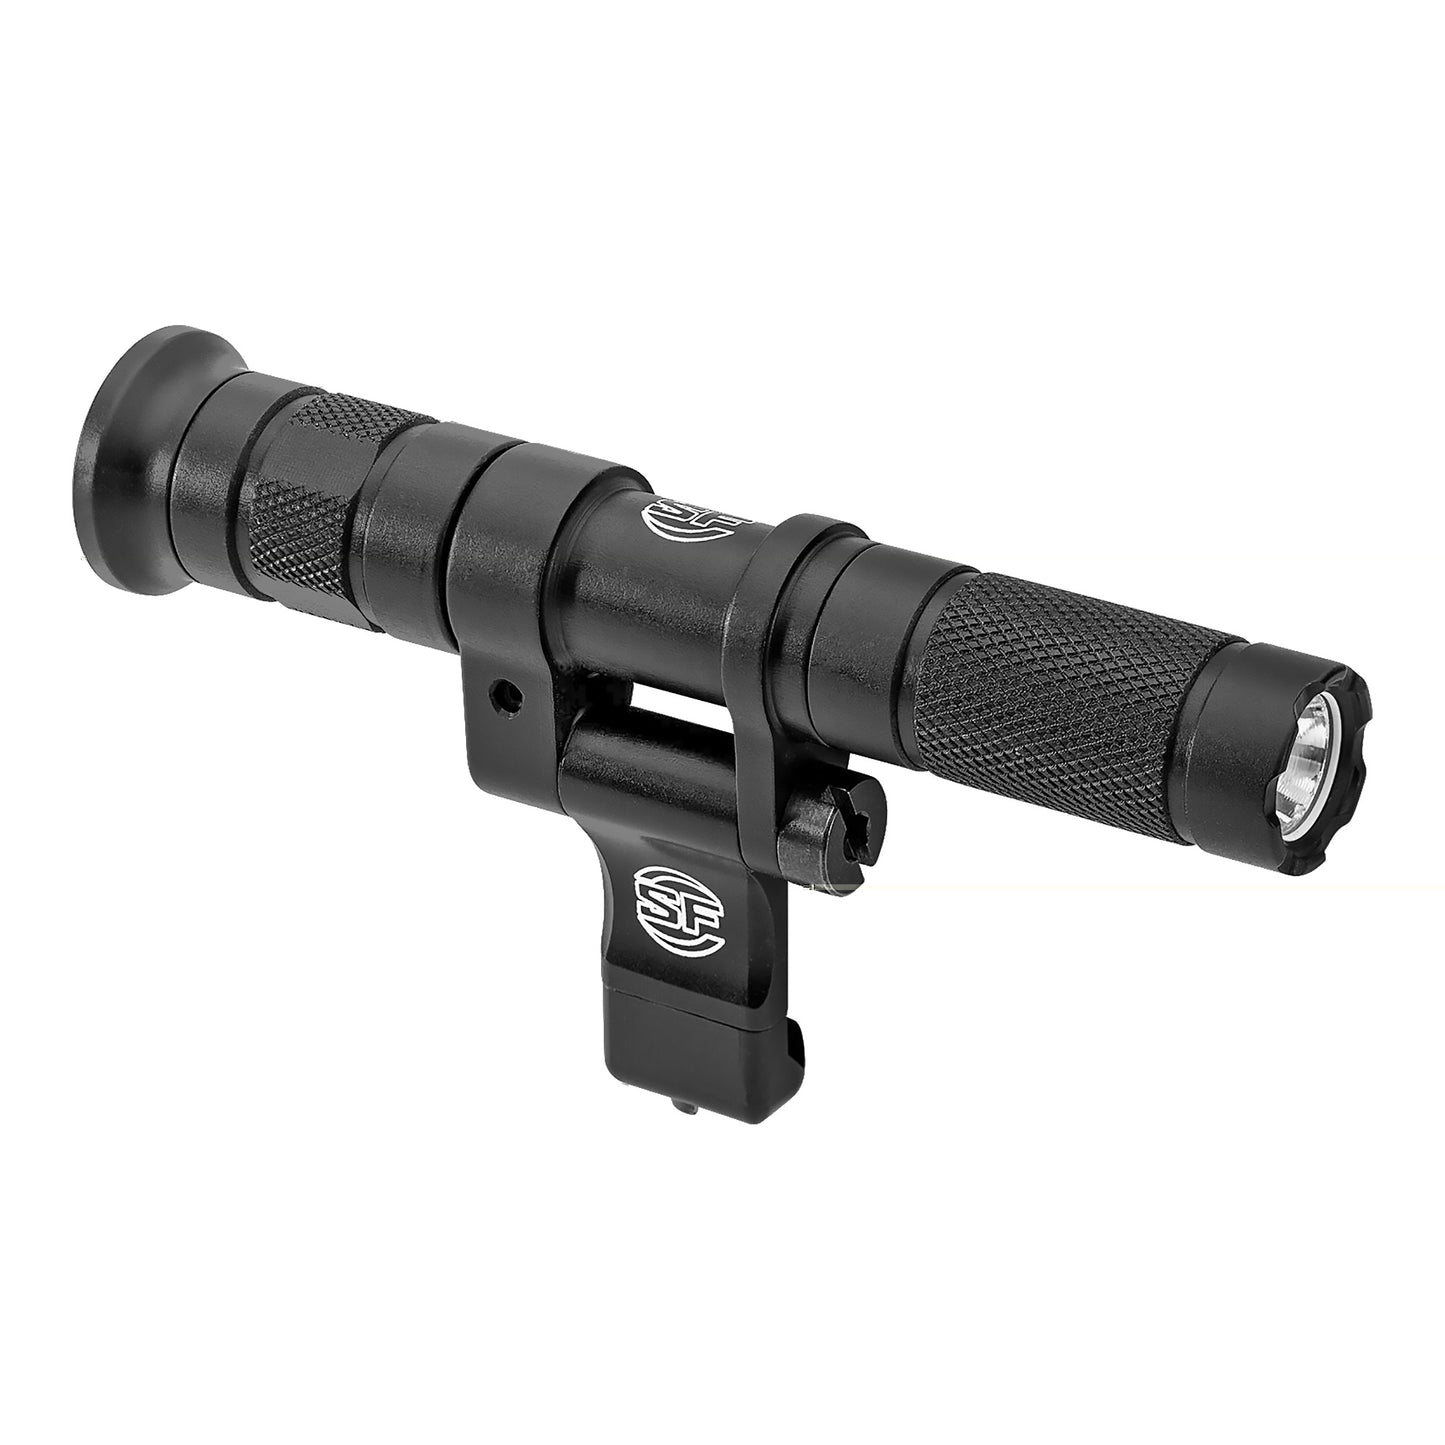 Surefire, M140A Micro Scout Light Pro, Weaponlight, 300 Lumens, 1,045 Candela, 1.25 Hours of Runtime, Click Tailcap, Includes 1 Rechargeable AAA NiMH Battery, Hard Anodized Finish, Black